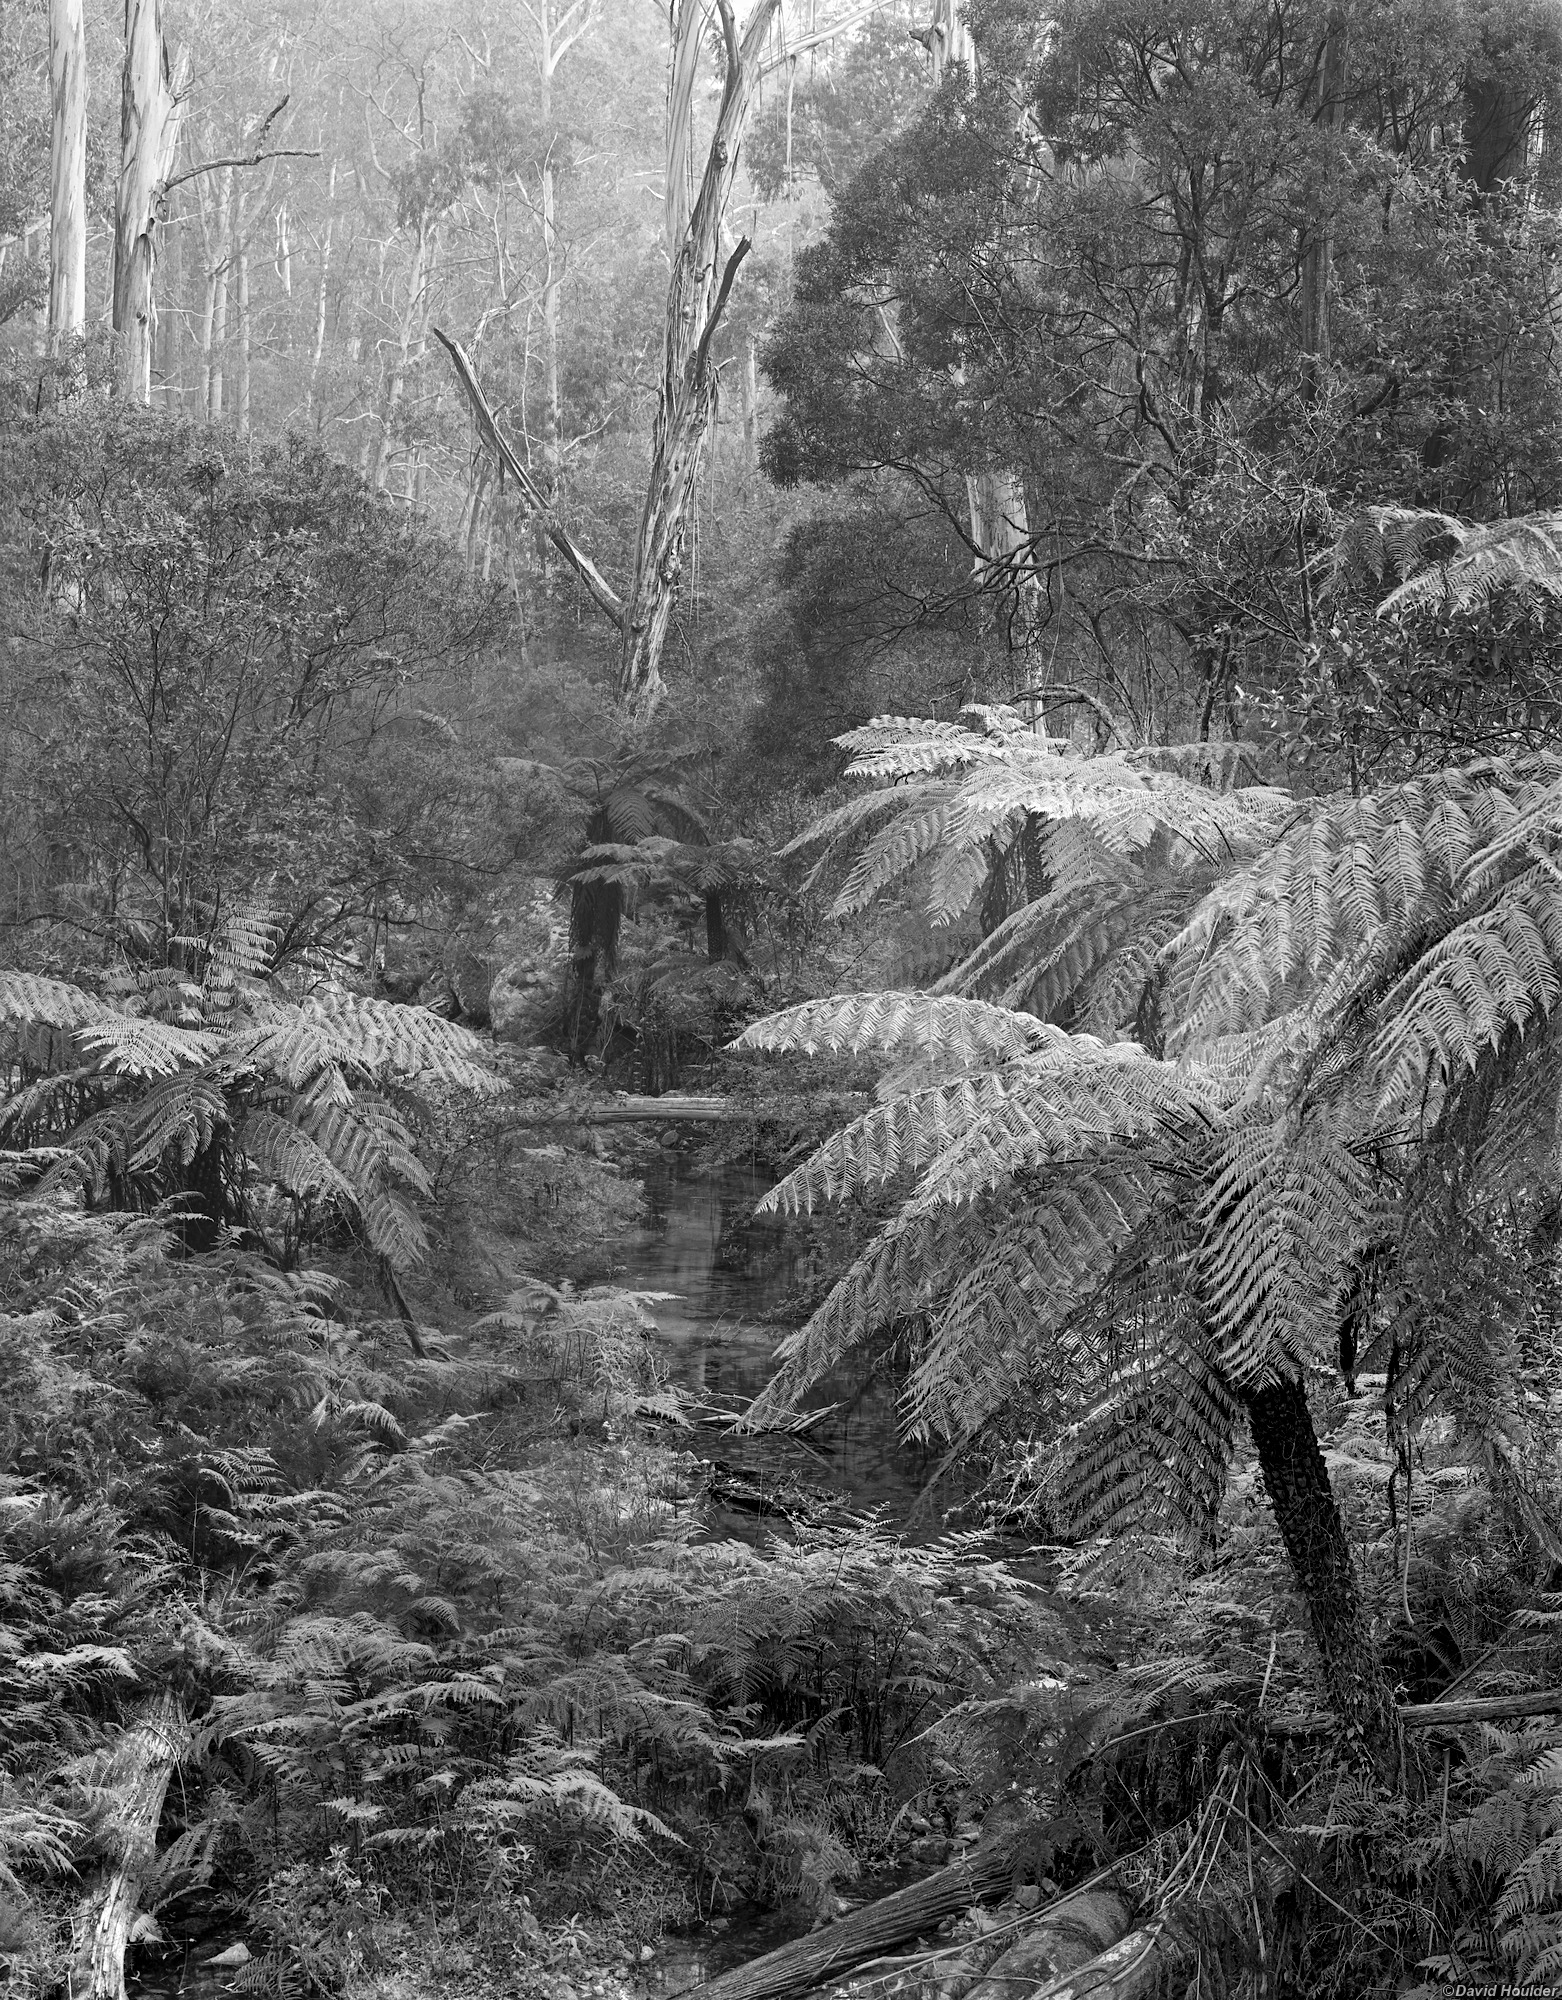 Tree ferns and eucalypt forest beside a small stream